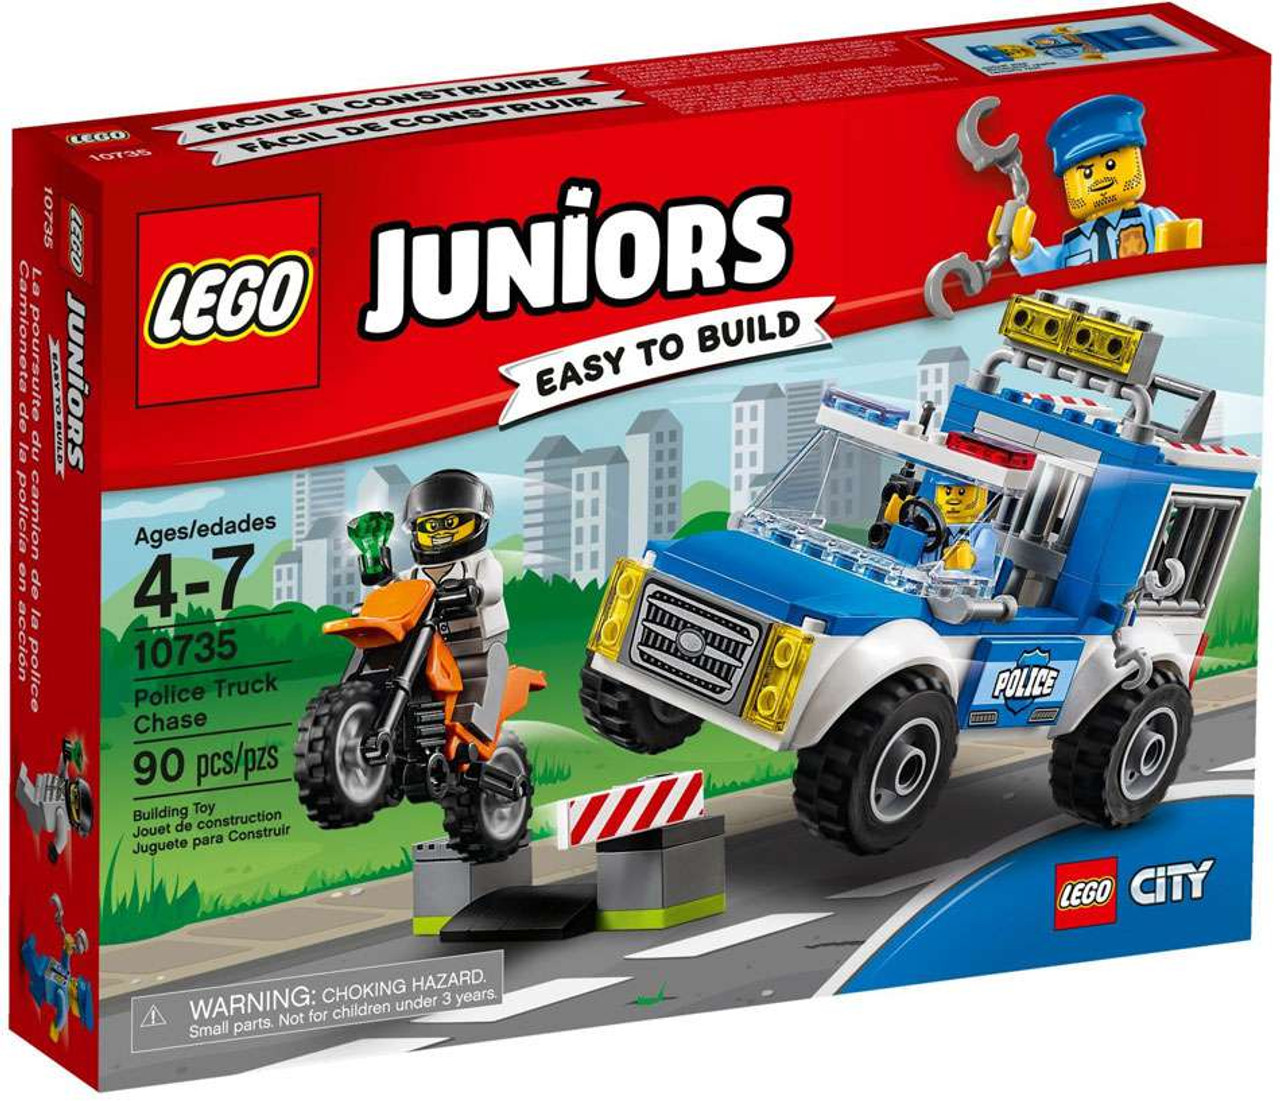 Lego Juniors Police Truck Chase Set 10735 Damaged Package Toywiz - roblox users 10680 profile